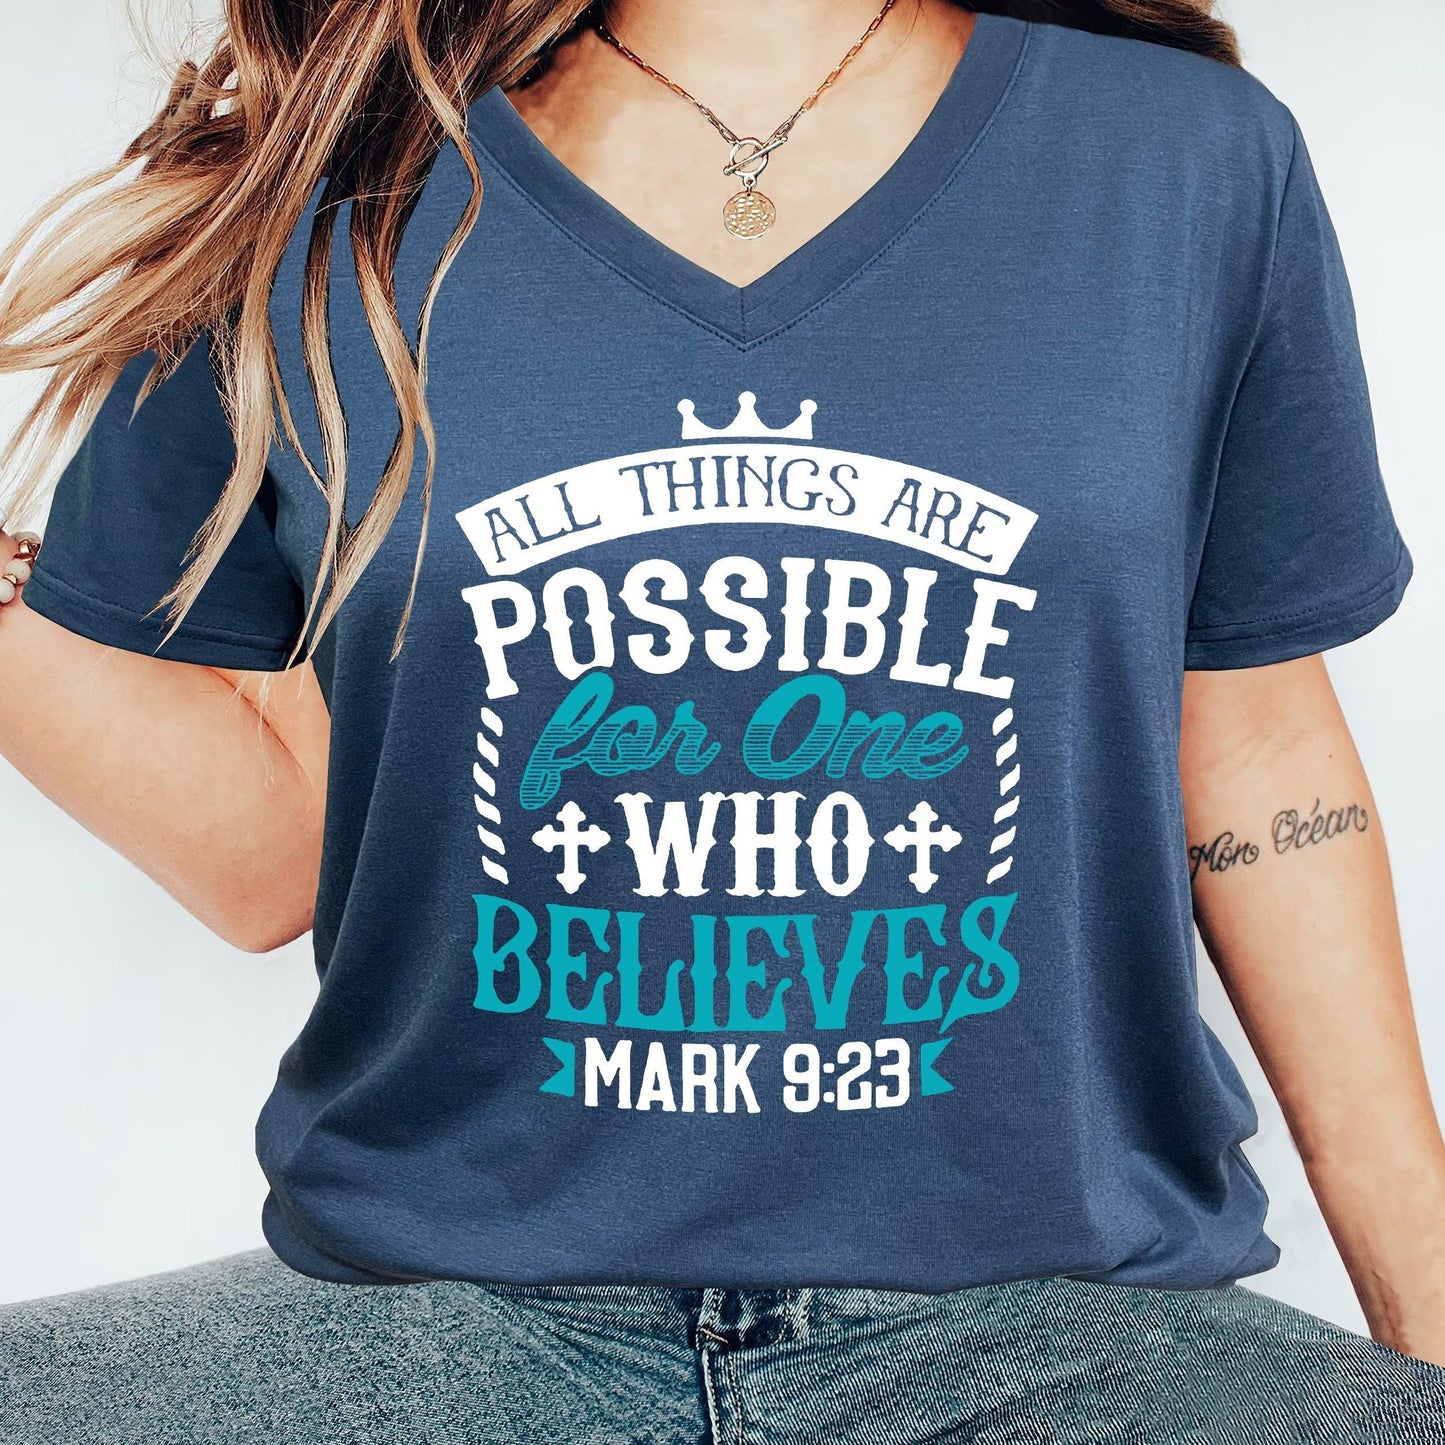 All Things Are Possible For One Who Believes Women's Christian V Neck T-Shirt claimedbygoddesigns